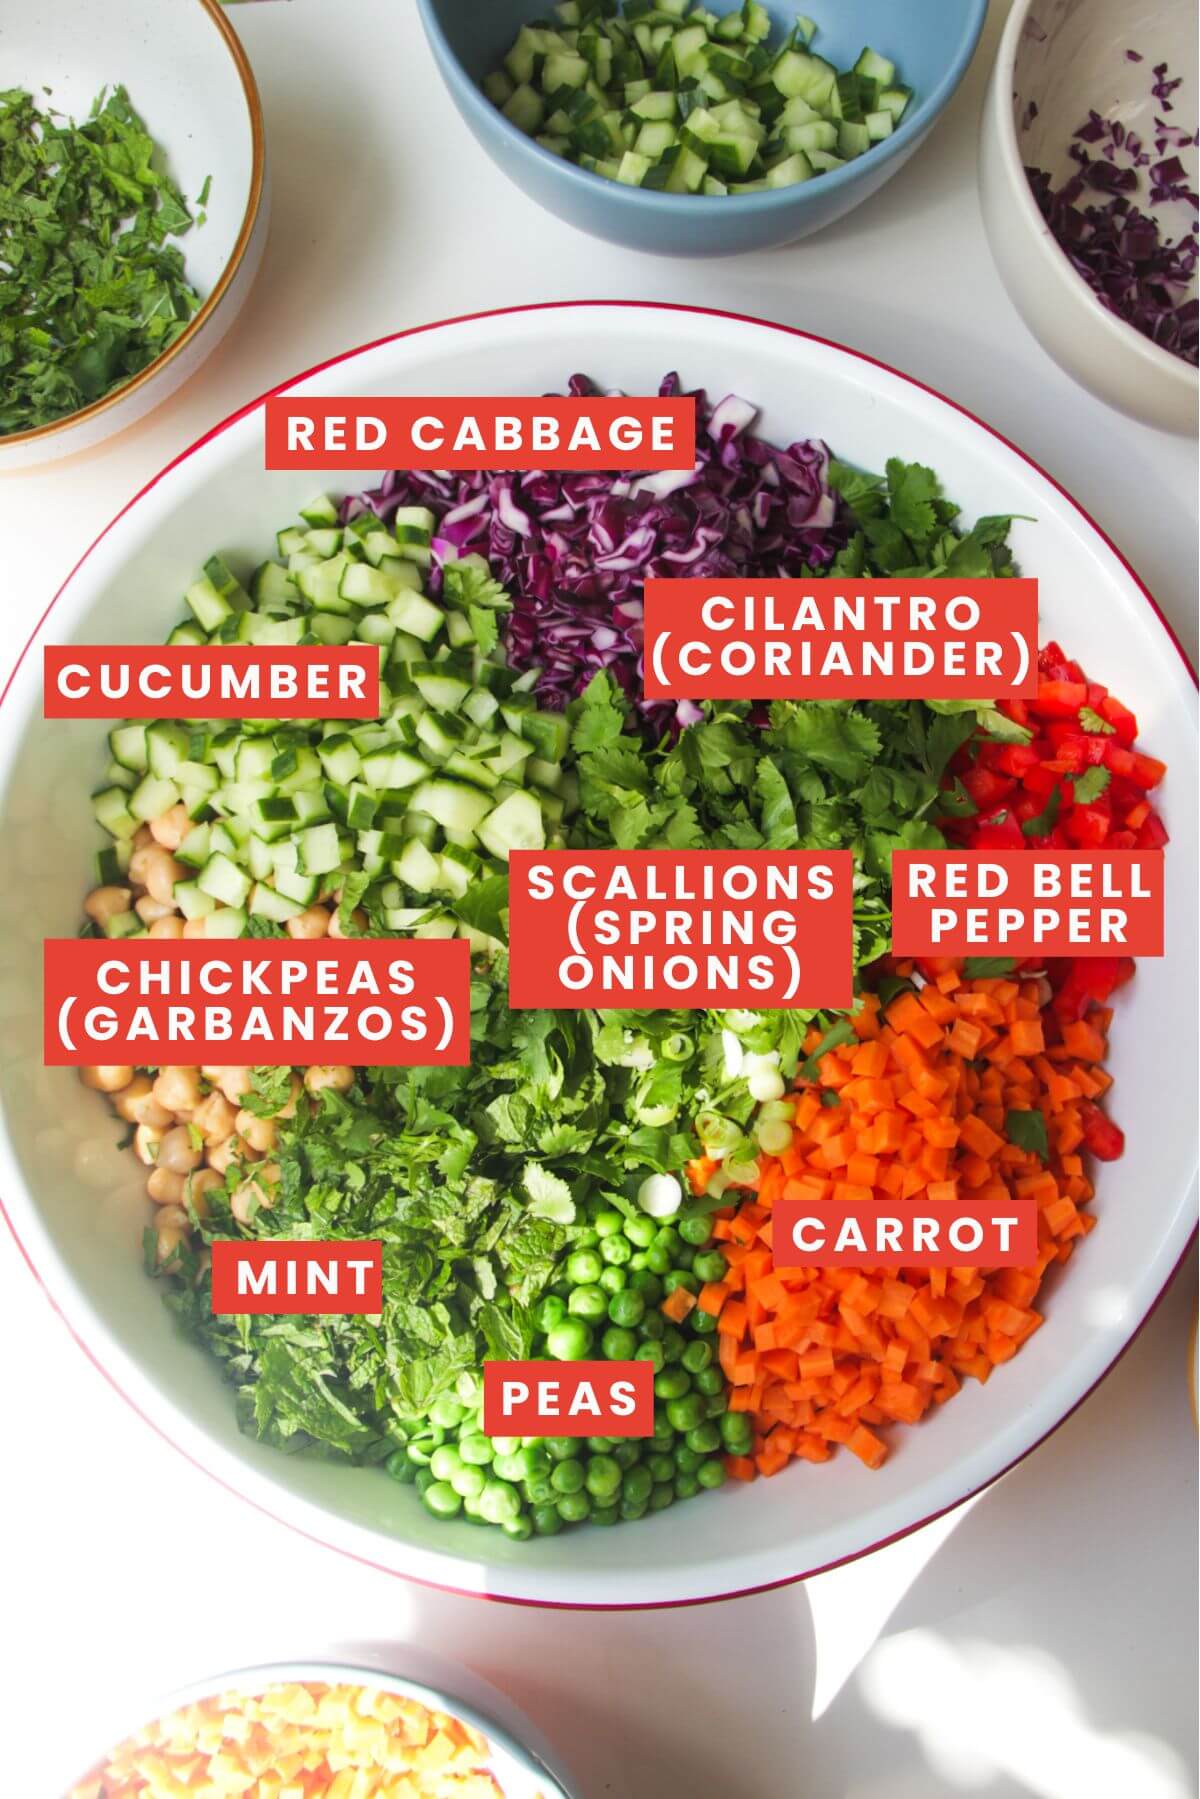 Chopped vegetables in a large white mixing bowl with bowls of more vegetables on the side, labelled with their names.